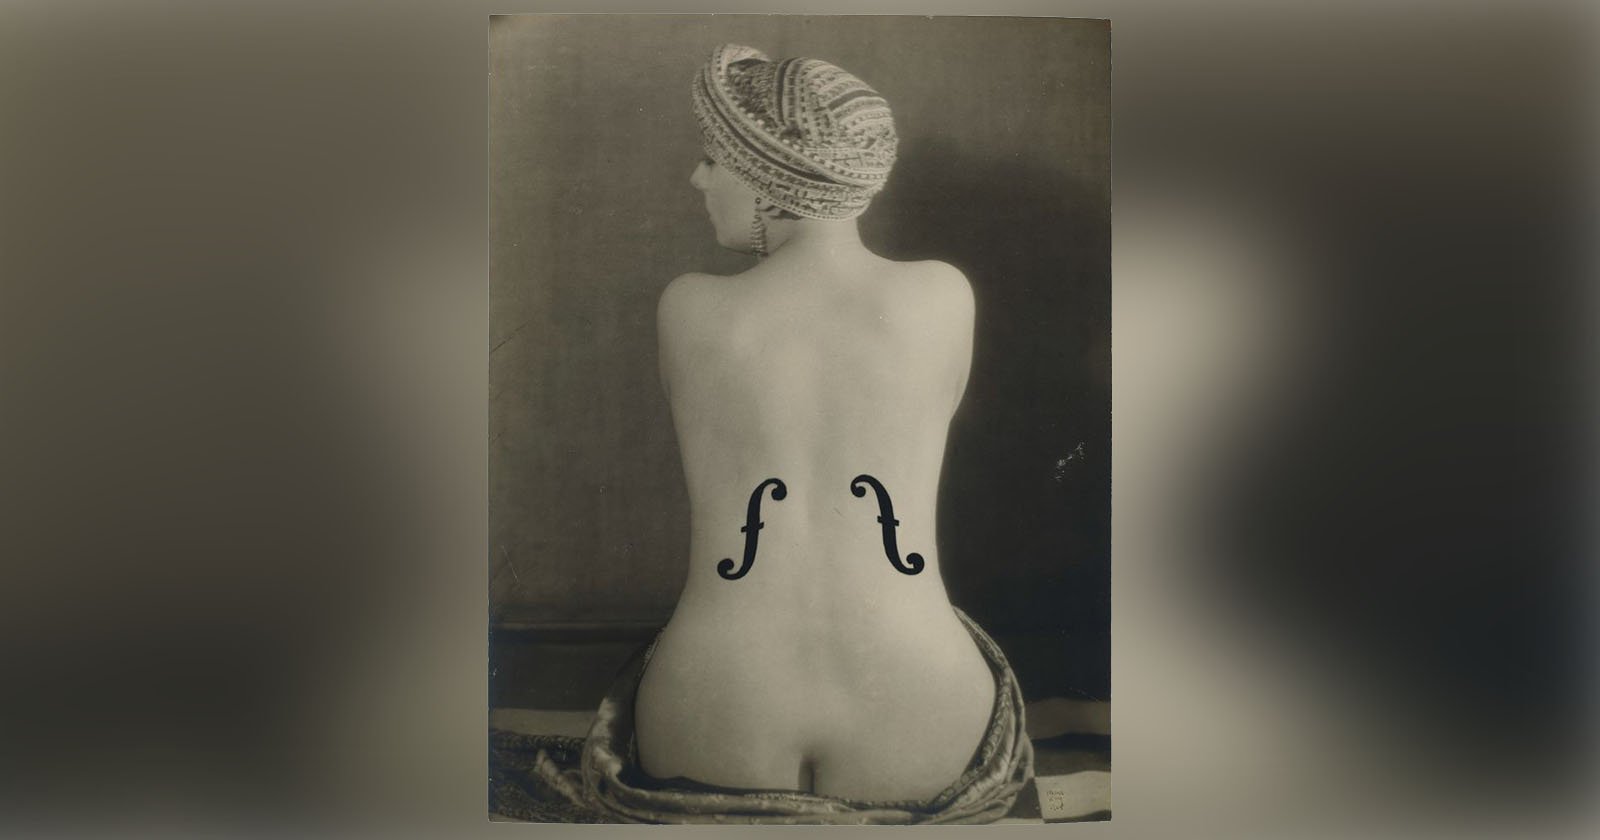 DELA DISCOUNT manray-photo-to-set-auction-record Man Ray Photo of Nude Woman May Soon Be Most Expensive Photo Ever DELA DISCOUNT  